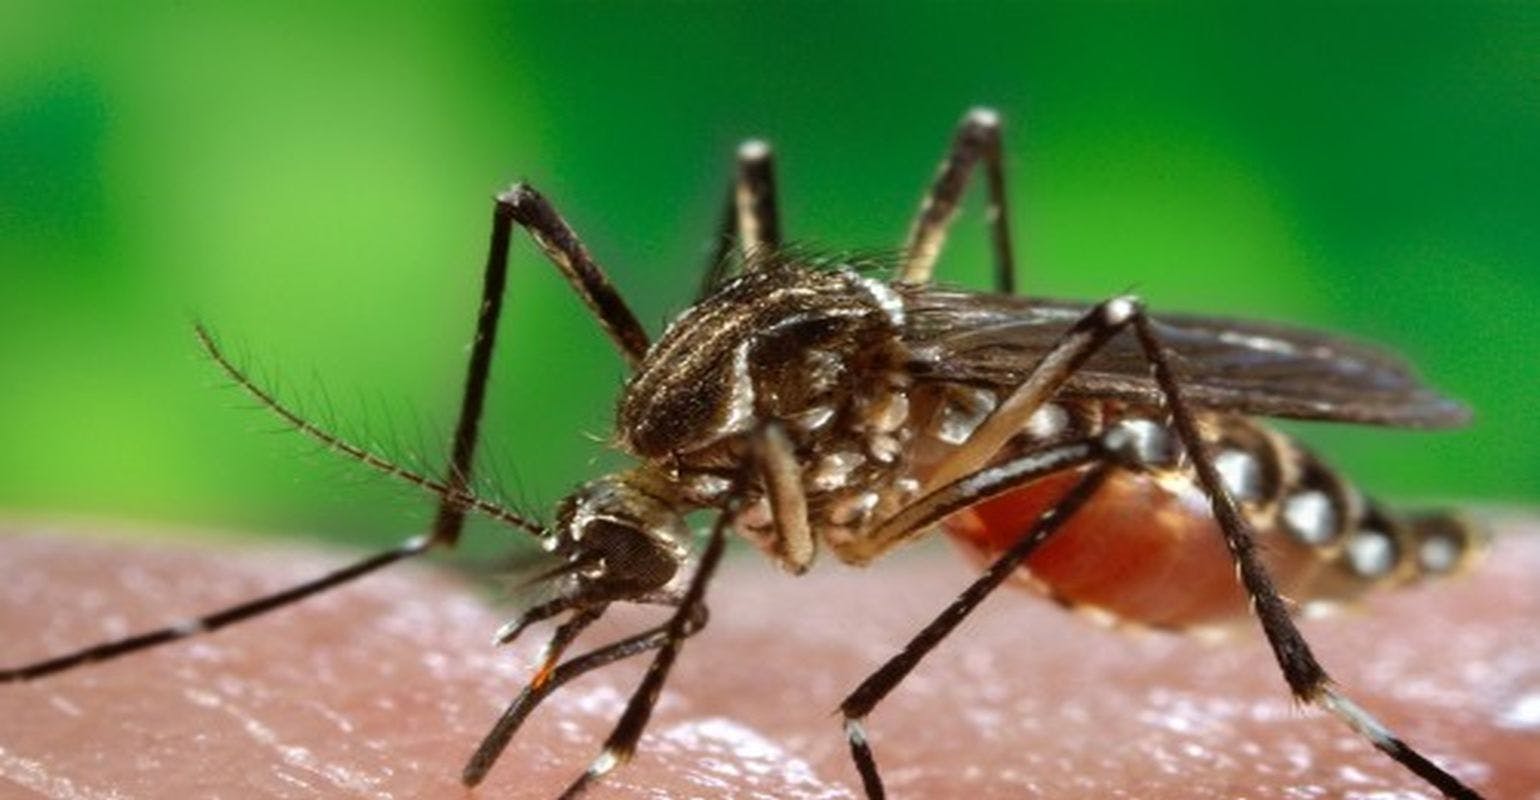 One-Third of Children Up to Age 3 Exposed to Zika In-Utero Have Neurological Problems